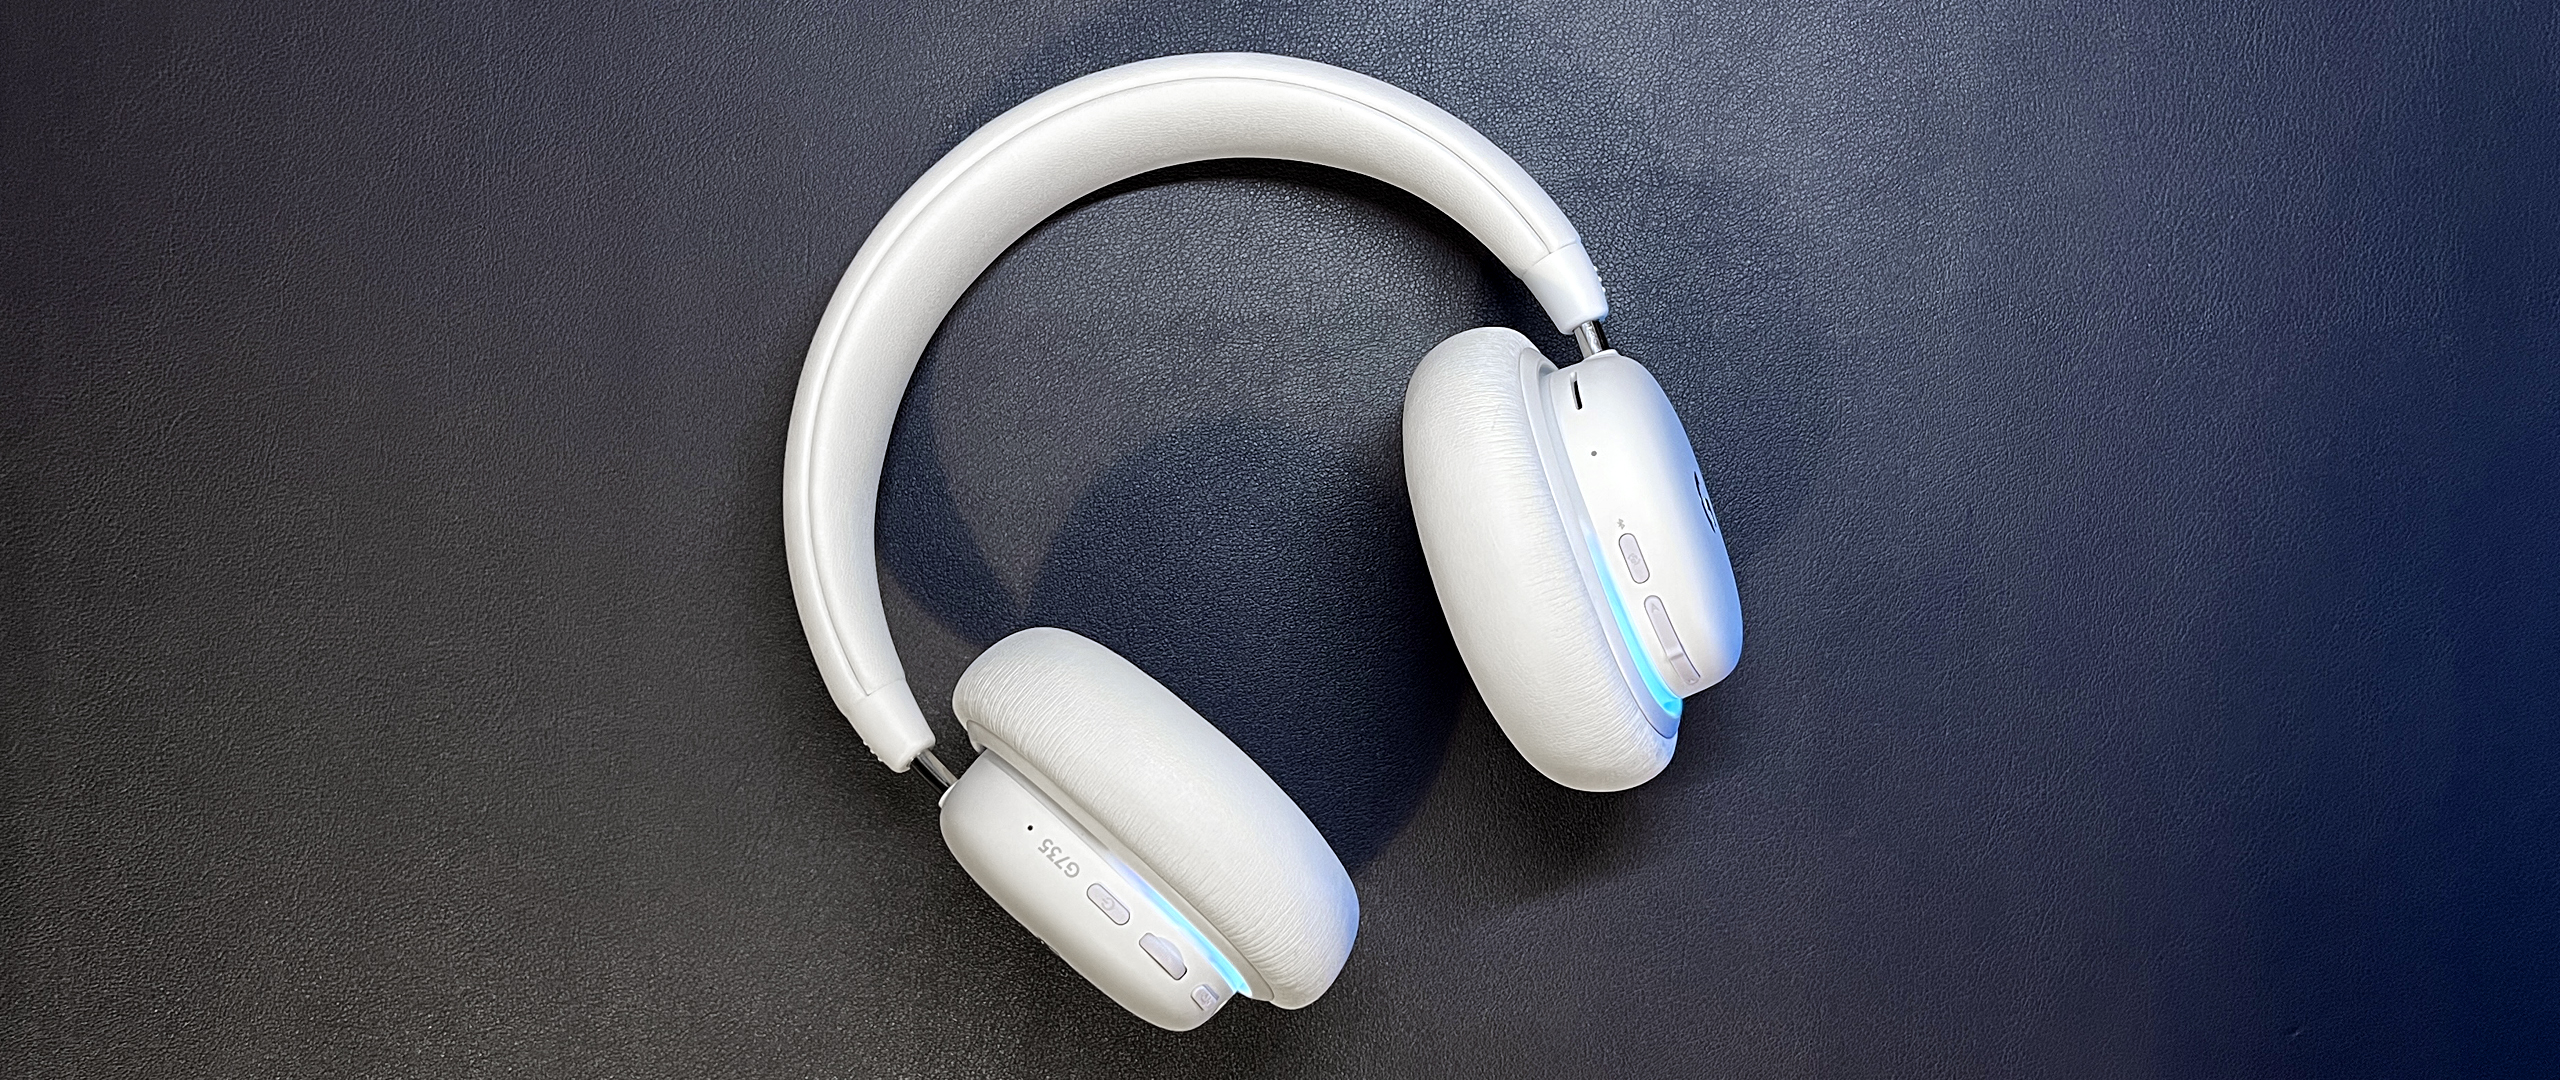 Logitech G735 Review: Not the First White Headset